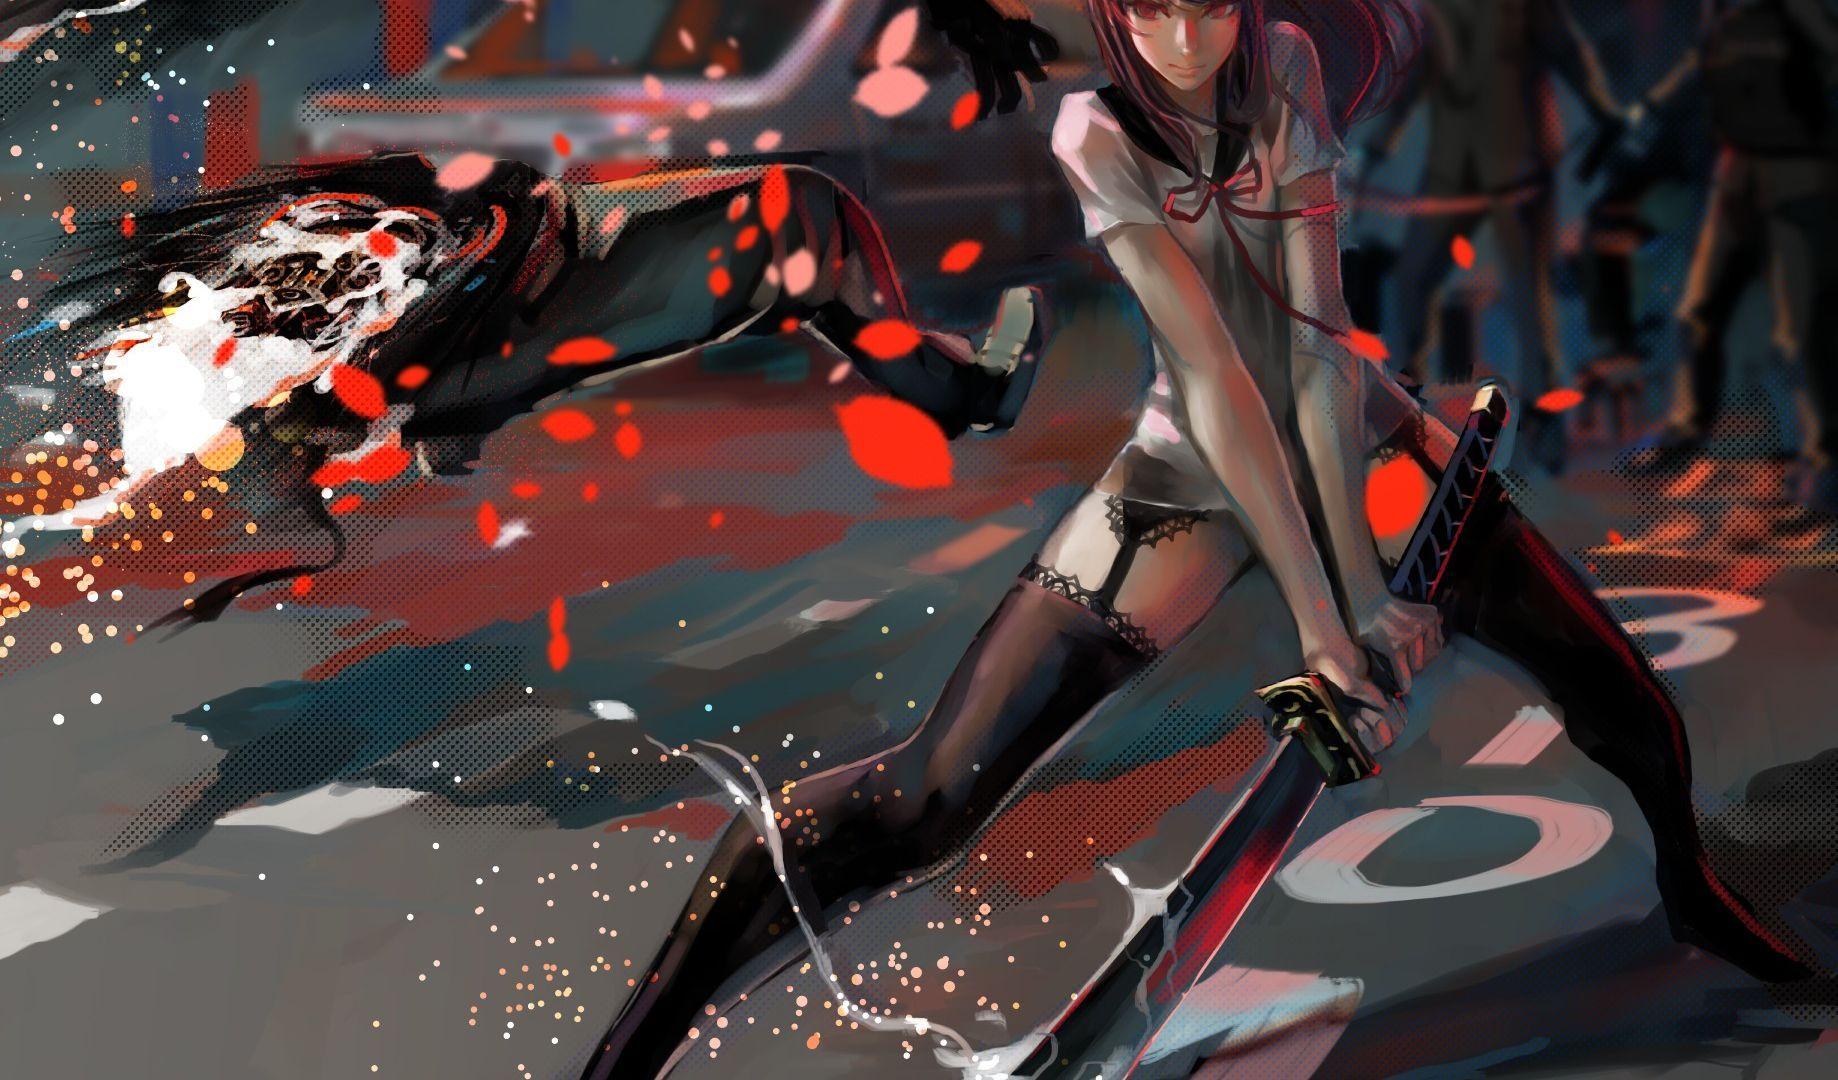 Glitch Anime Wallpapers - Top Free Glitch Anime Backgrounds